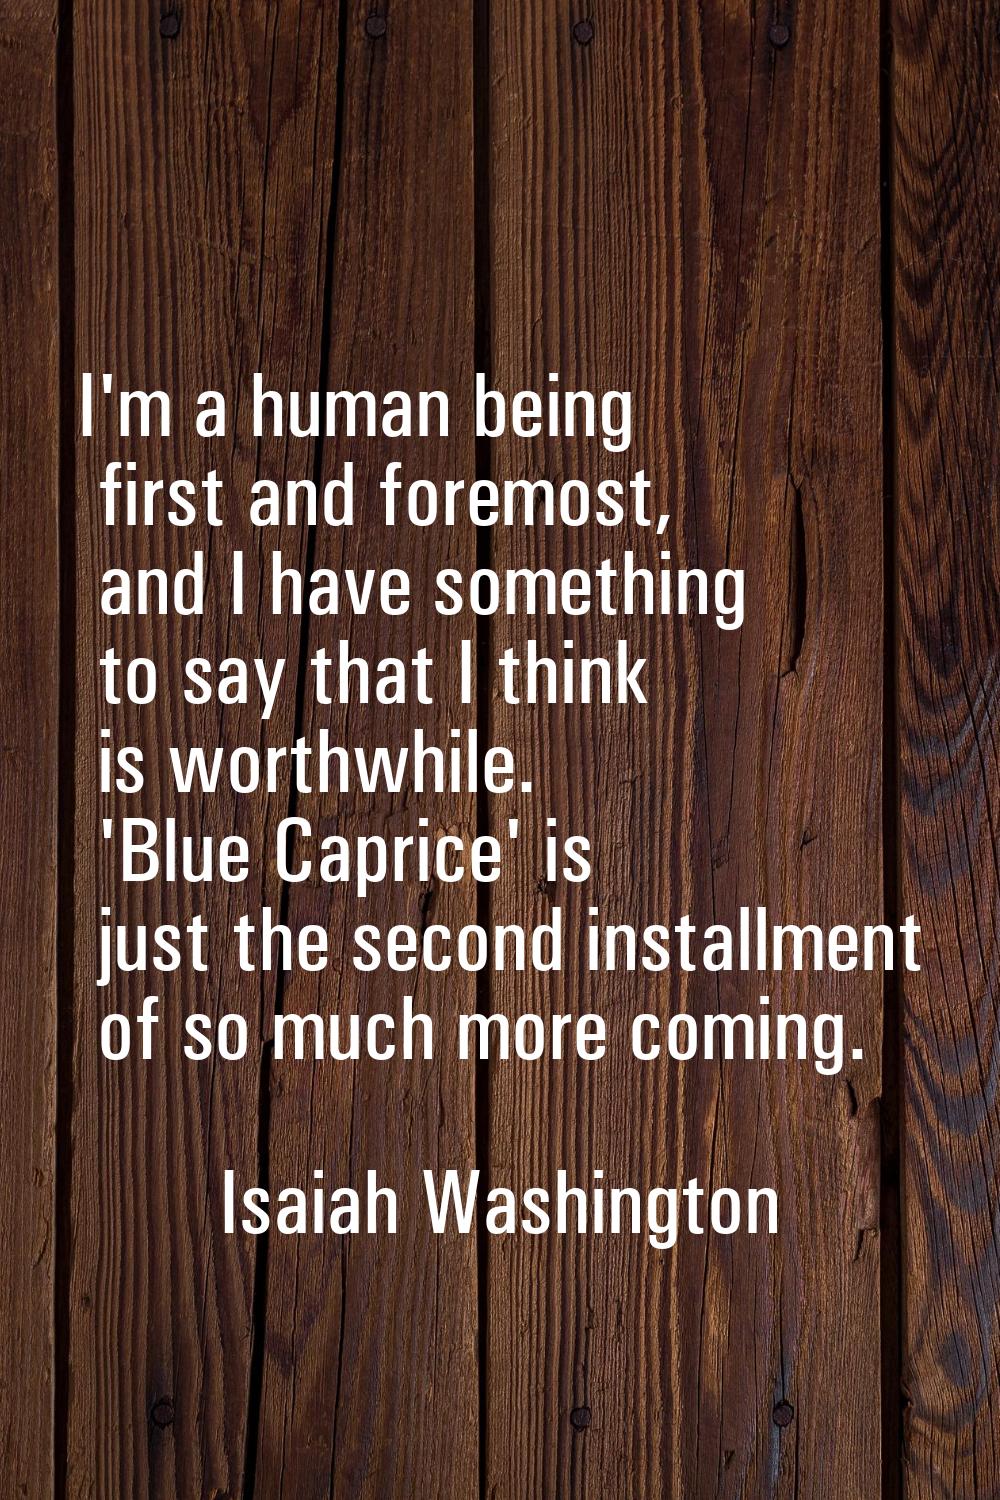 I'm a human being first and foremost, and I have something to say that I think is worthwhile. 'Blue